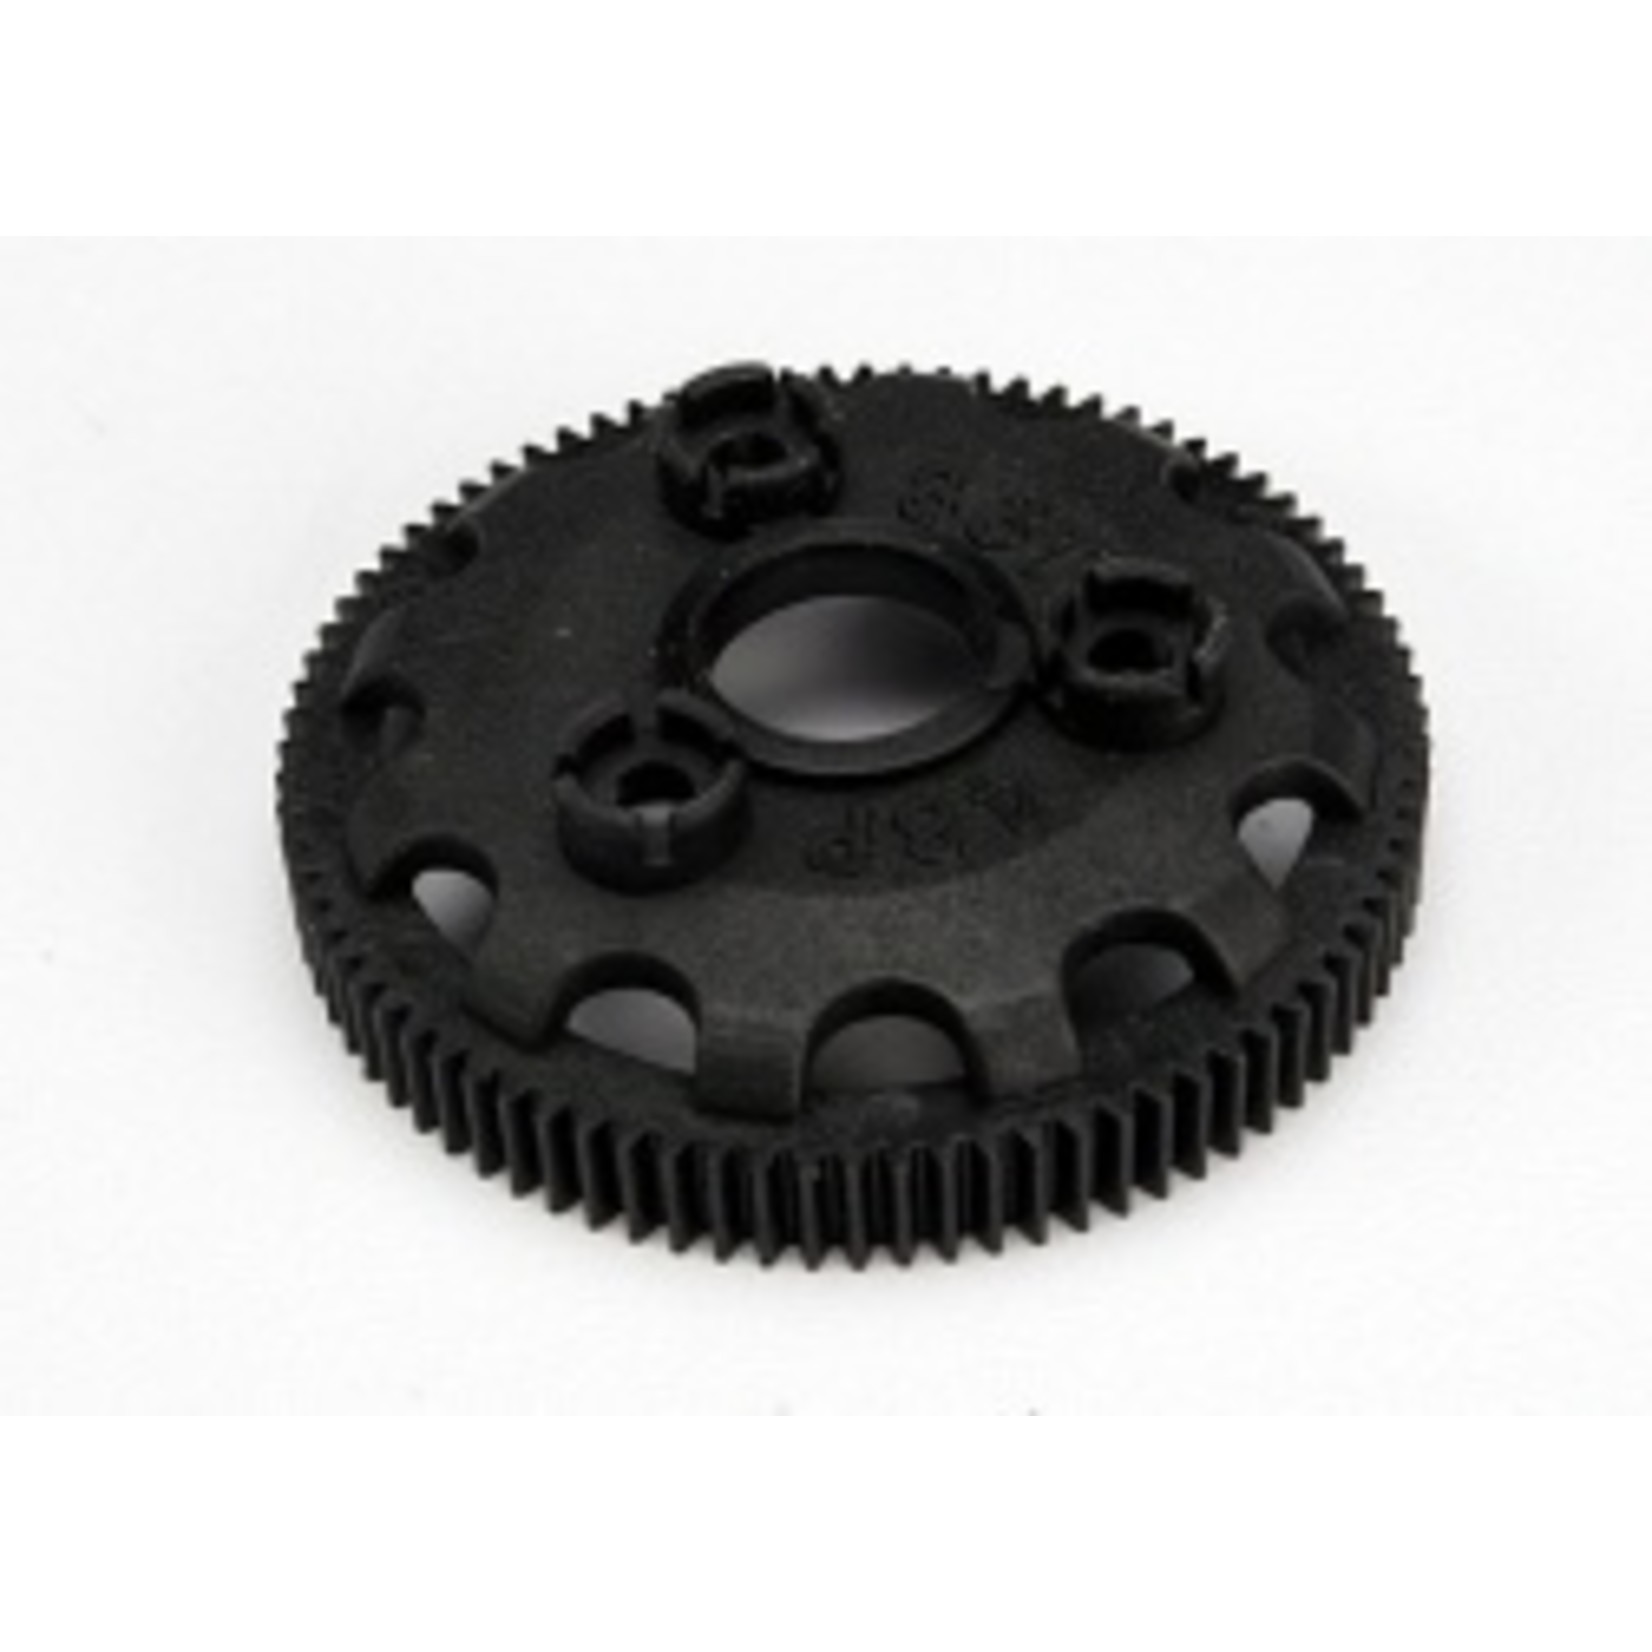 Traxxas Spur gear, 83-tooth (48-pitch) (for models with Torque-Control slipper clutch)